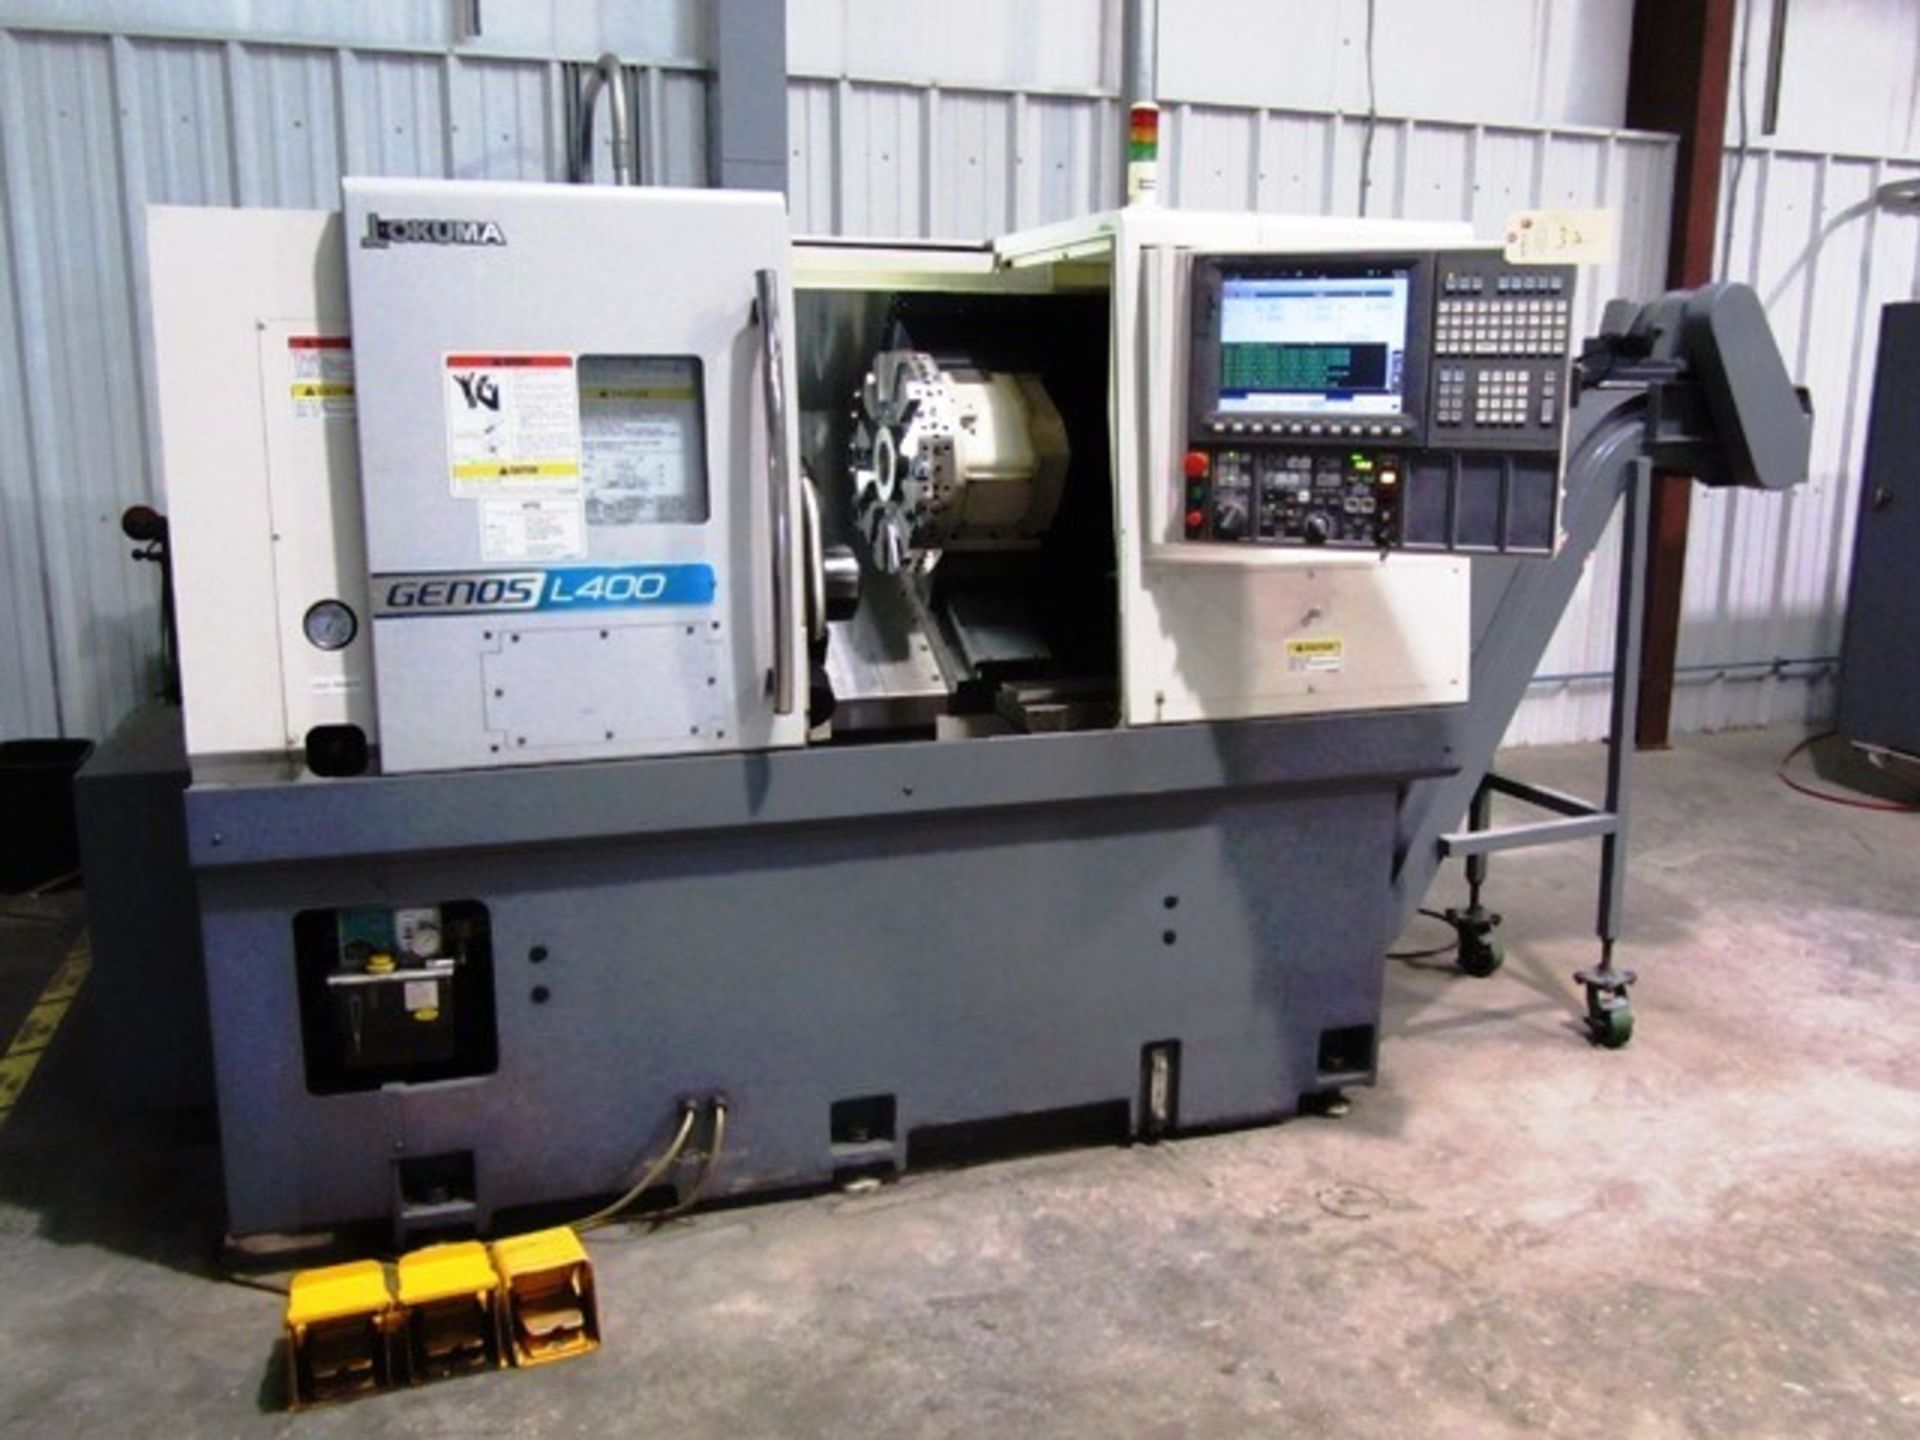 Okuma Model Genos L400 2-Axis CNC Turning Center with Collet Chuck, 12 Station Turret, 20'' Distance